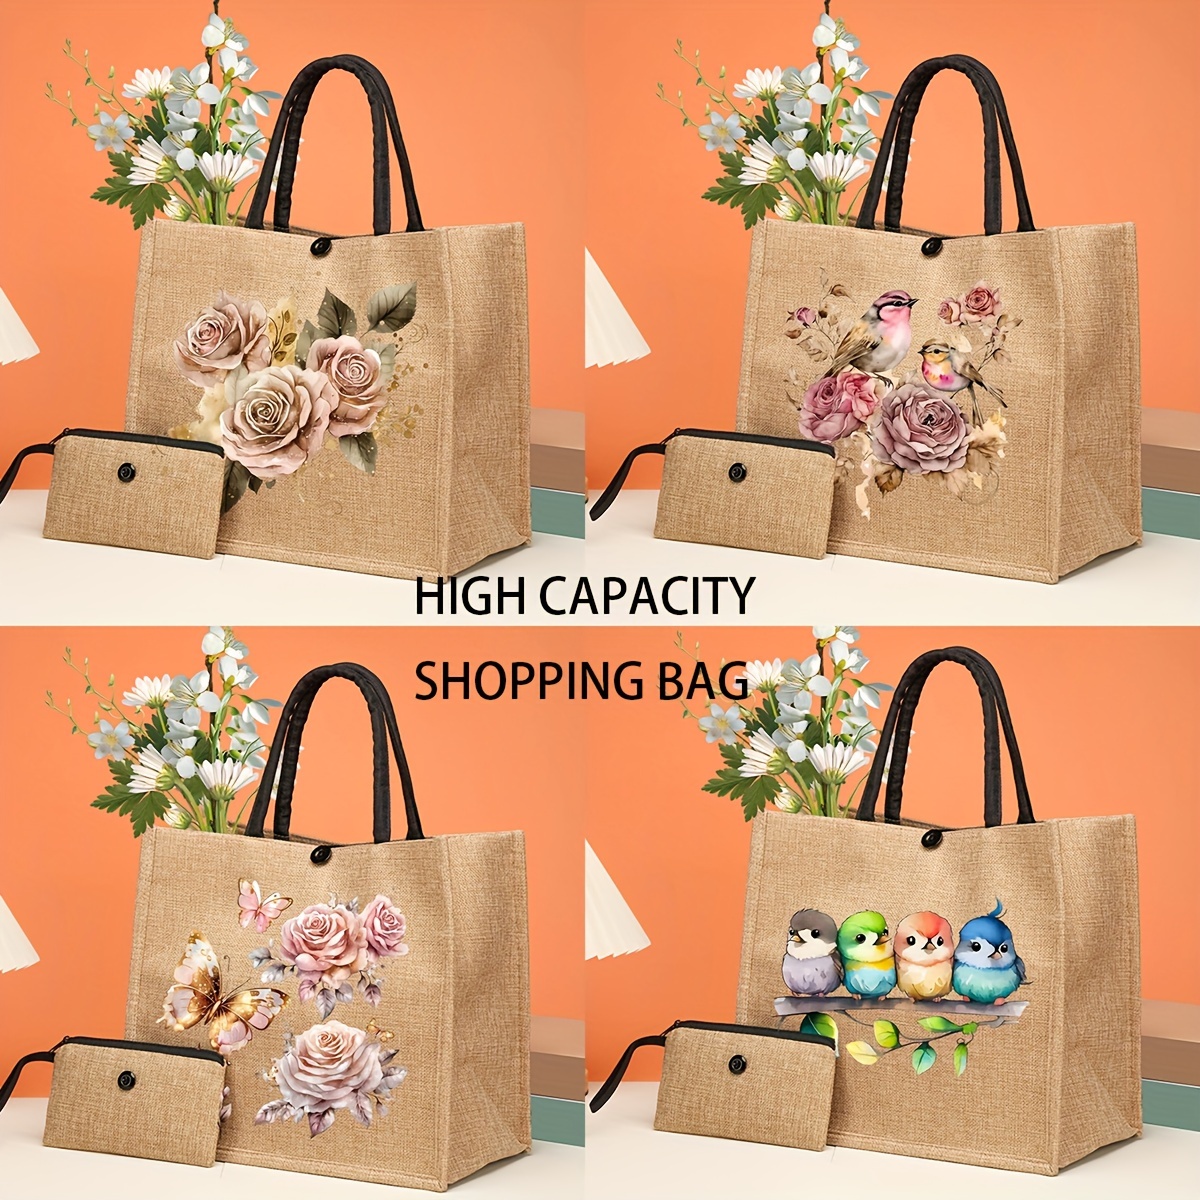 

2-piece Set Burlap Tote Bags With Floral & Birds Print, Fashionable Shoulder Bag With Cosmetic Pouch, Lightweight Travel Beach Bag